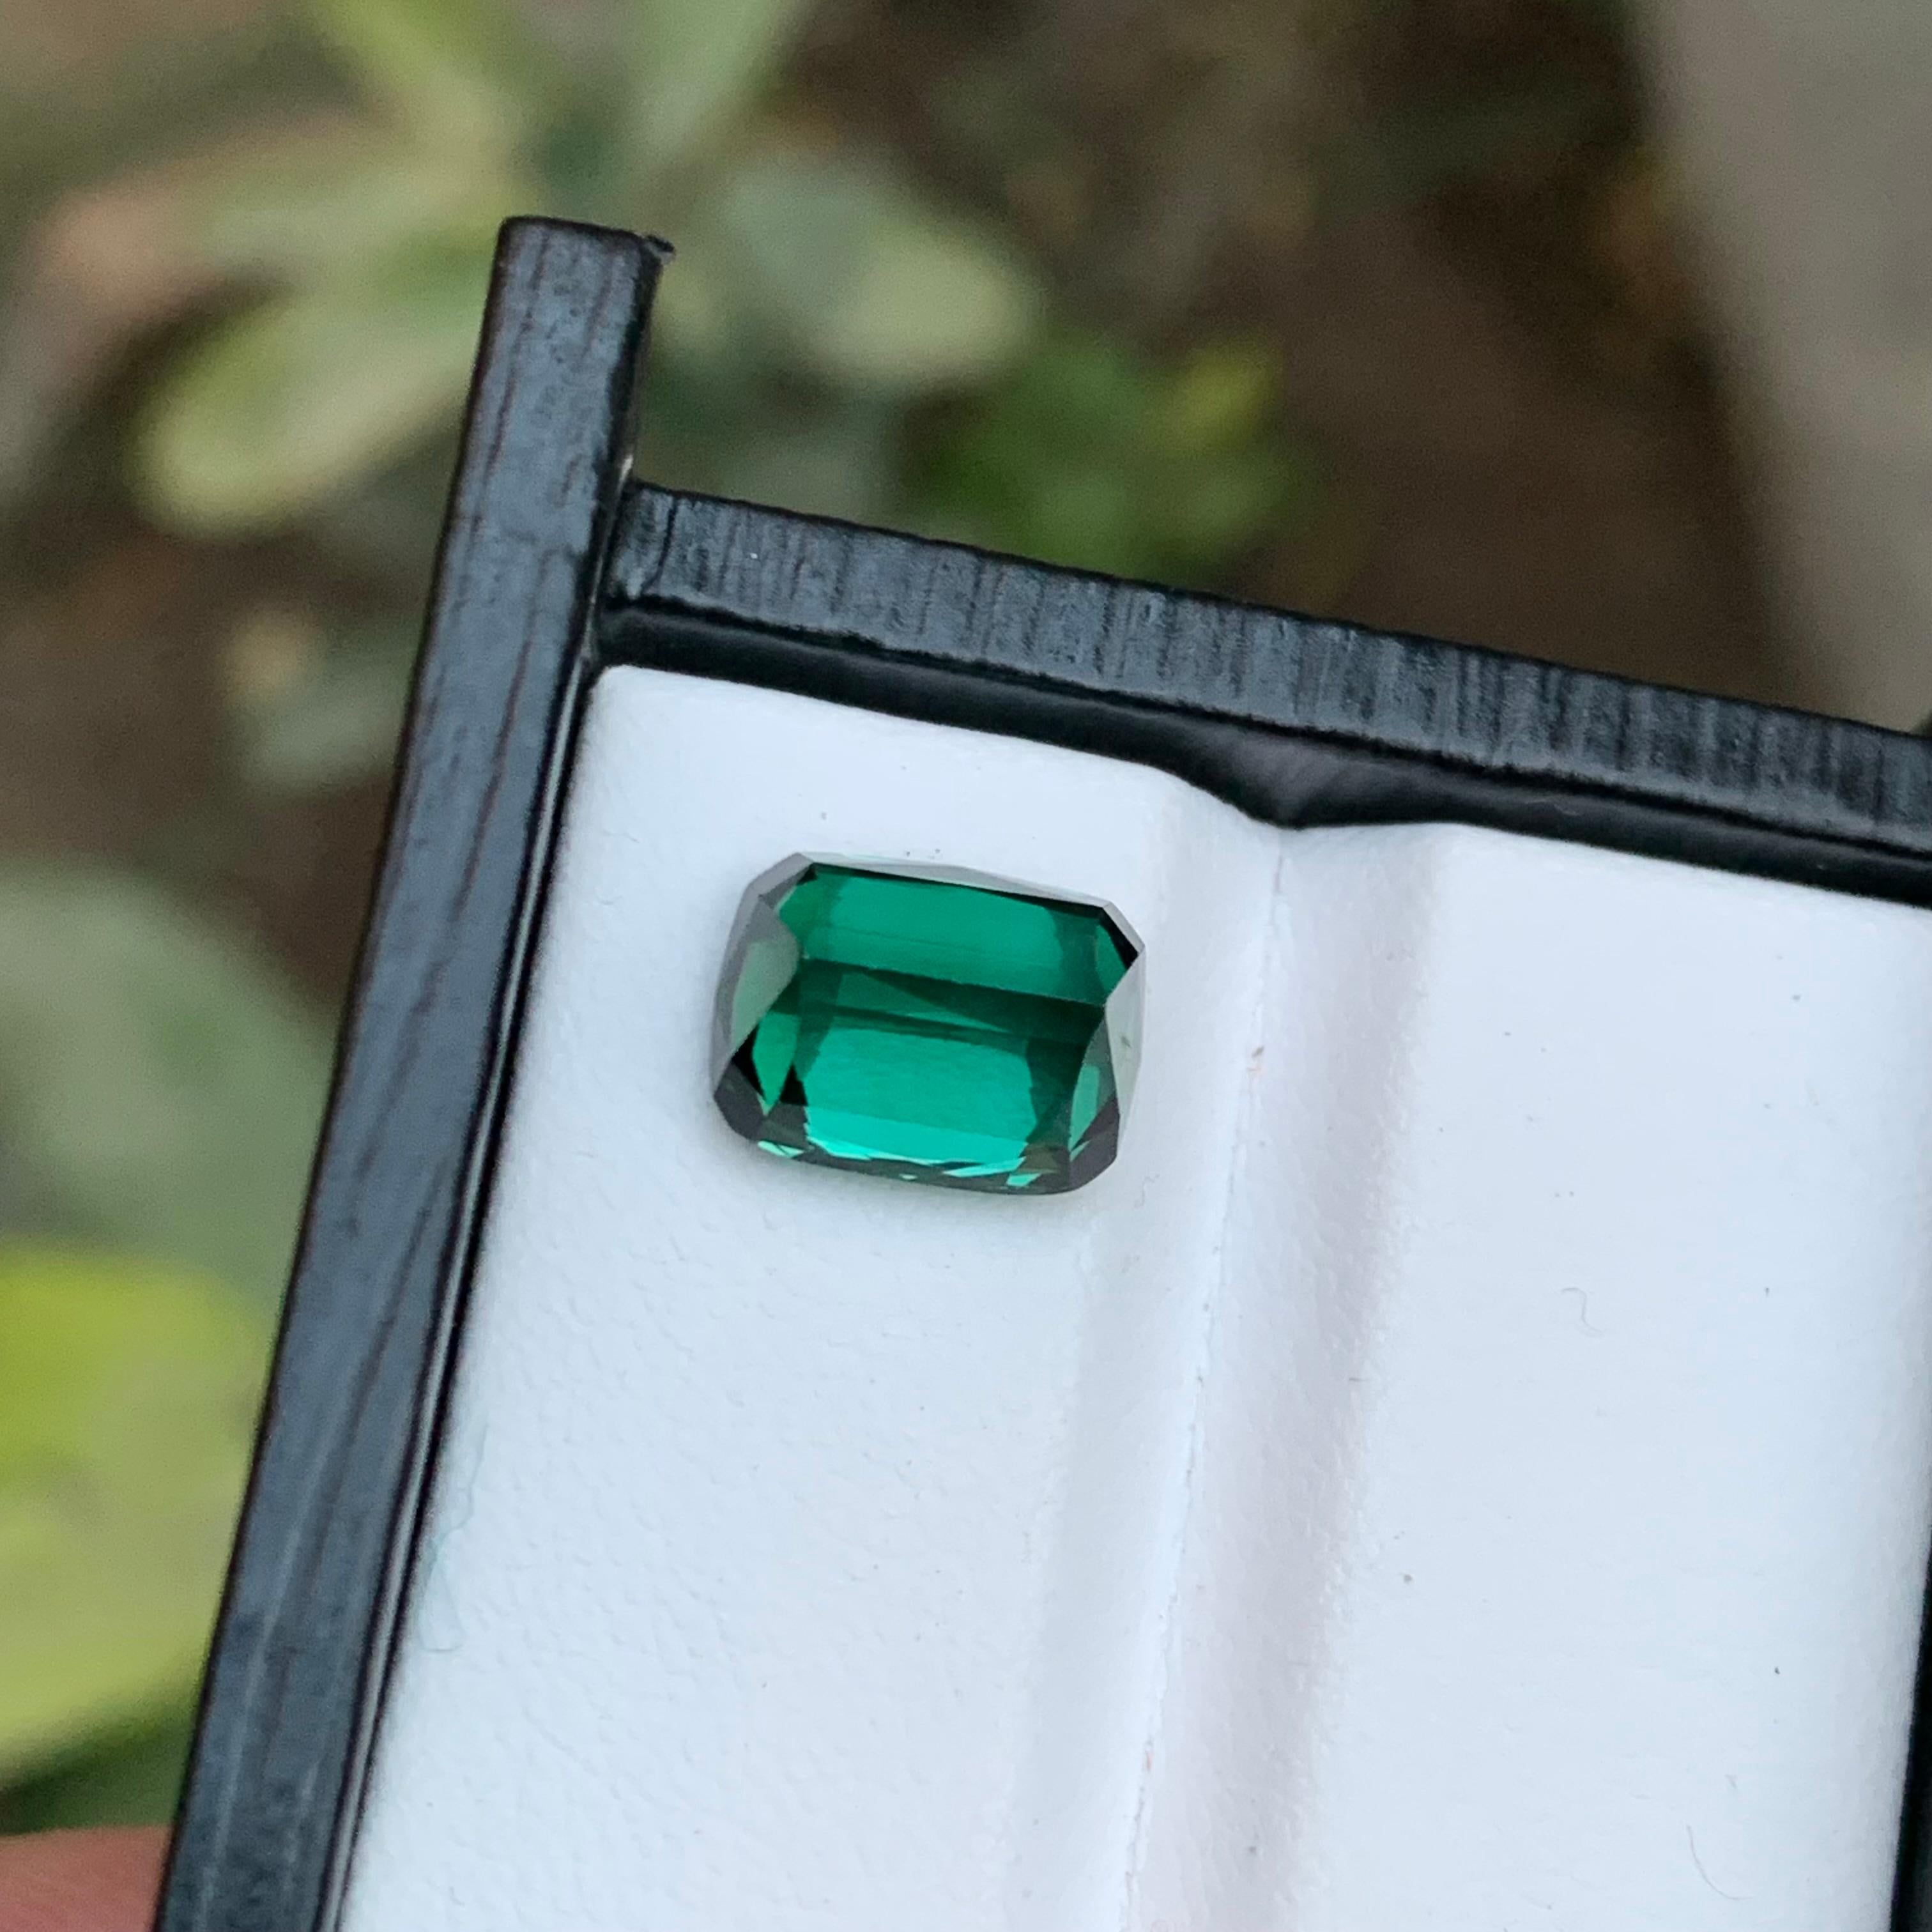 Rare Blue Green Natural Tourmaline Loose Gemstone, 4.35 Ct-Cushion Cut for ring For Sale 3